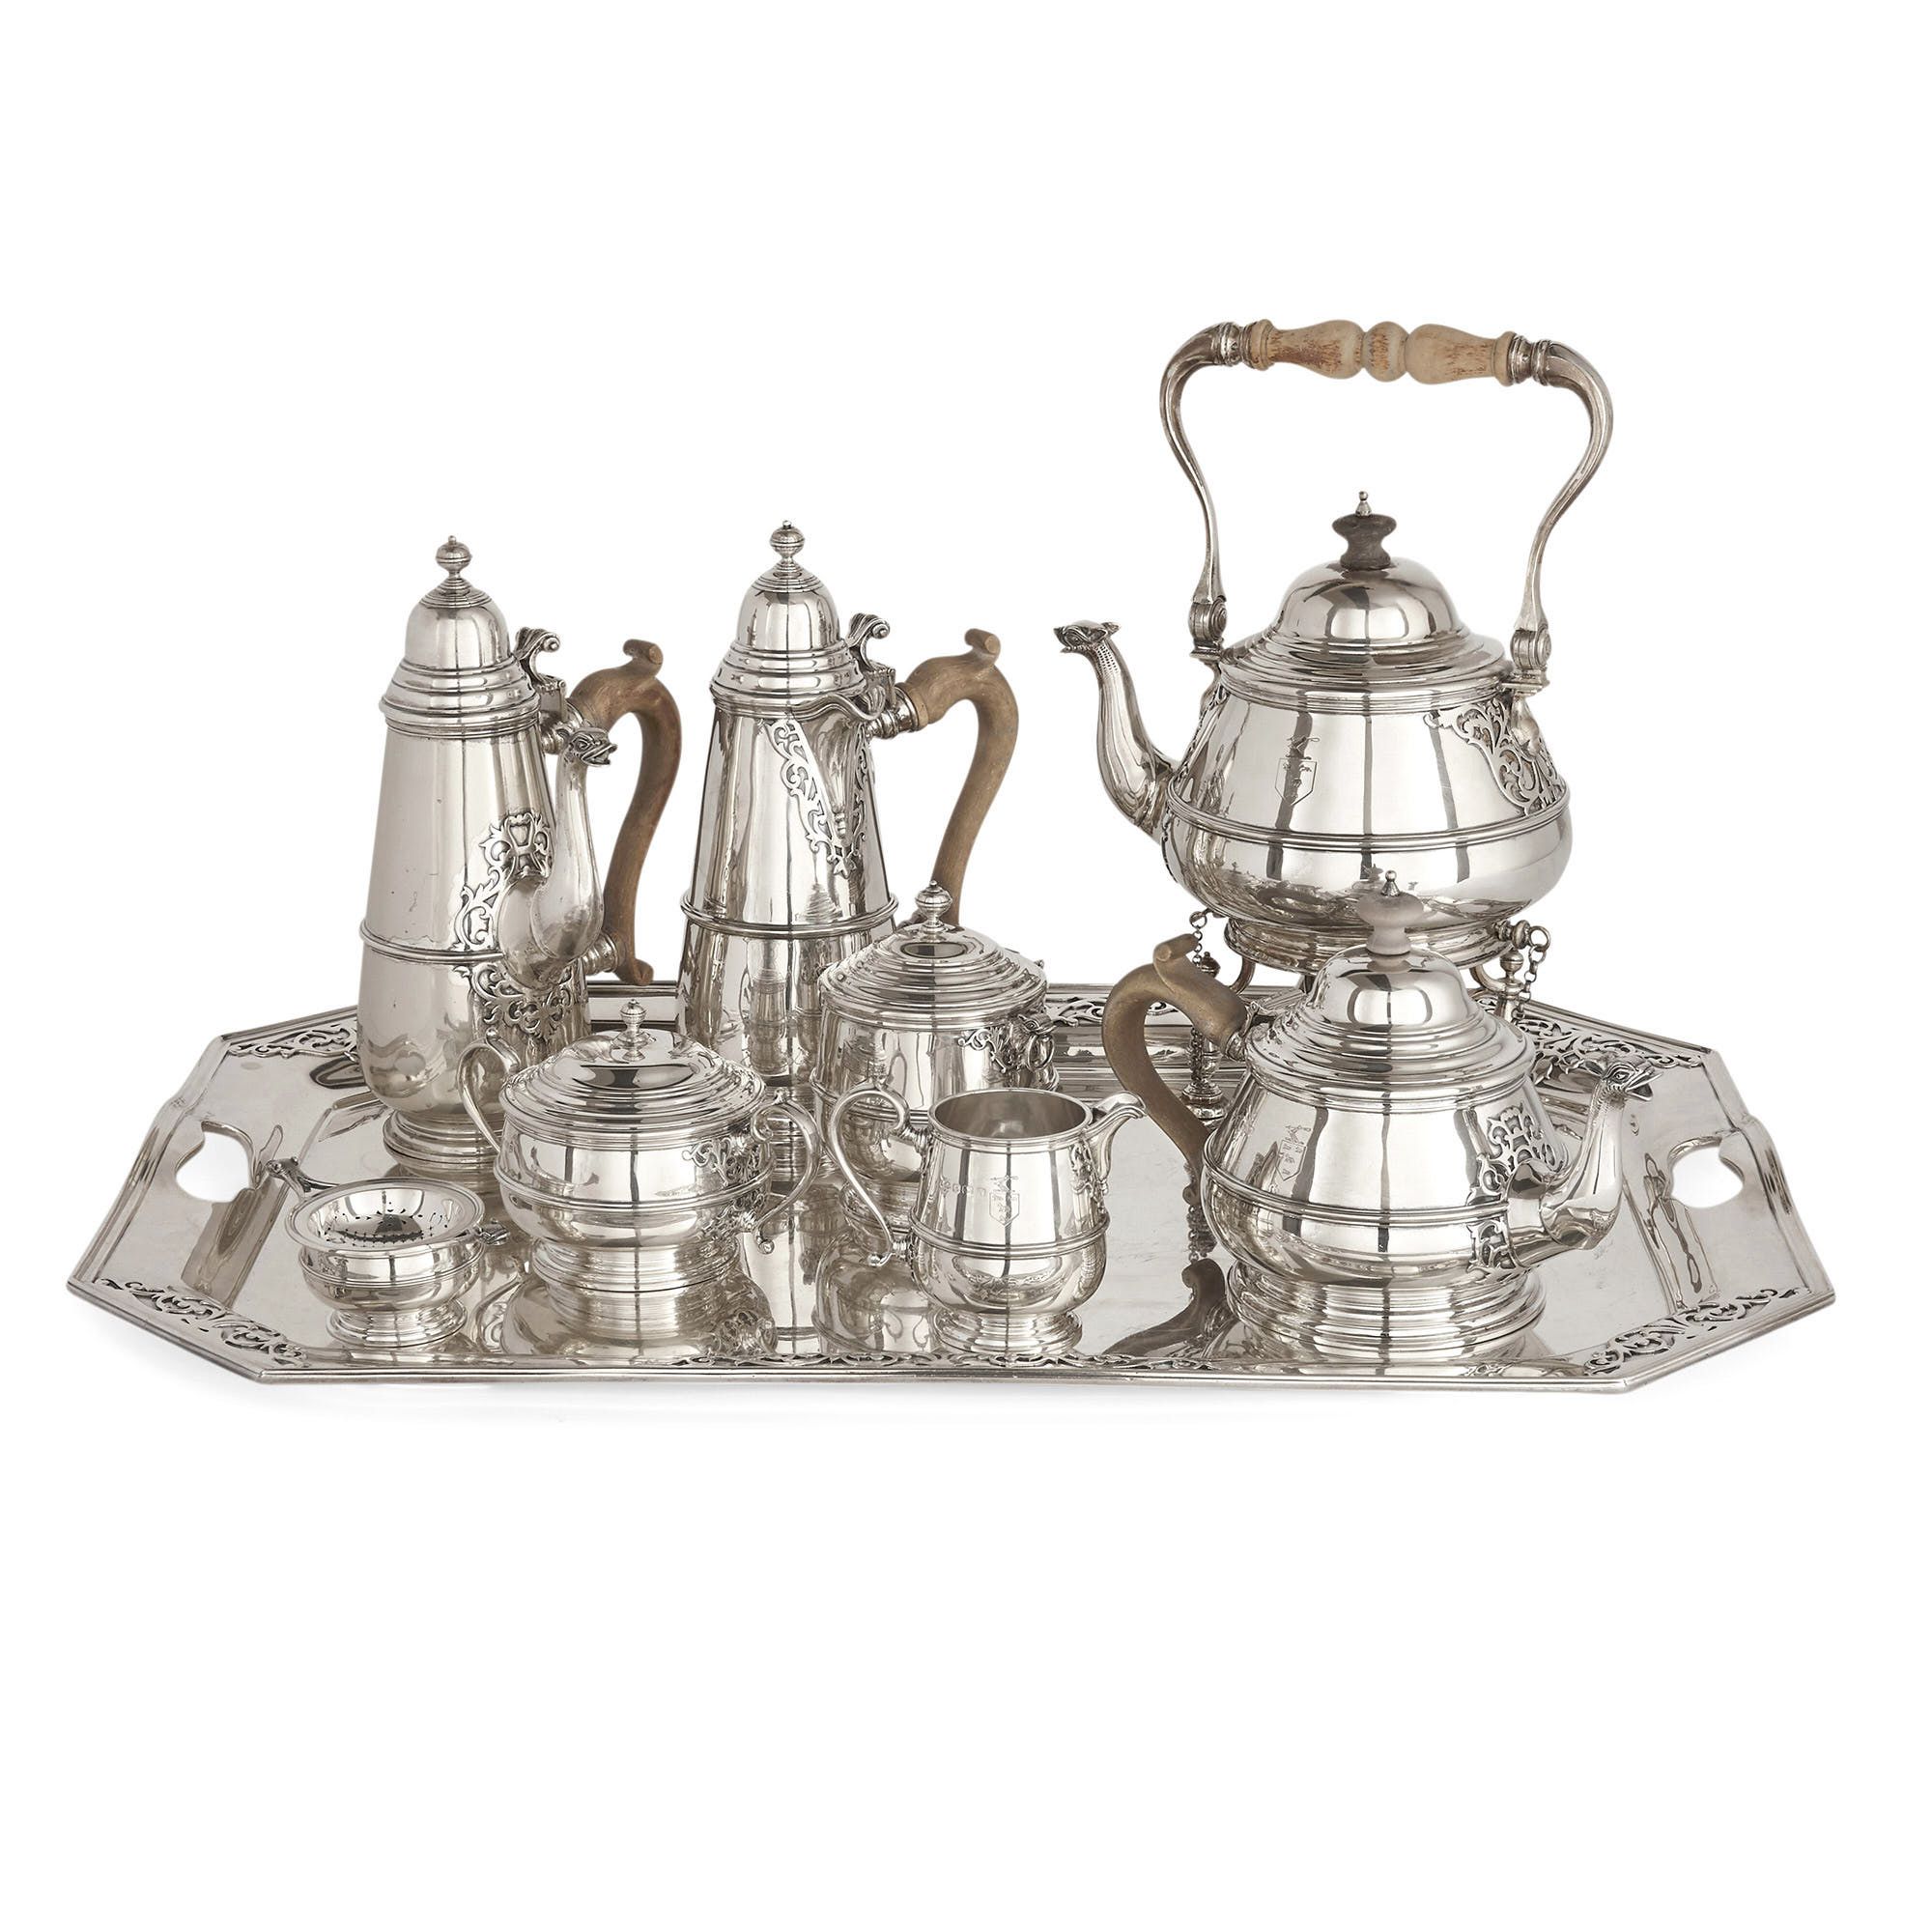 https://www.mayfairgallery.com/media/catalog/product/1/6/16369-nine-piece-english-silver-tea-and-coffee-service-with-tray-1-2000x.jpg